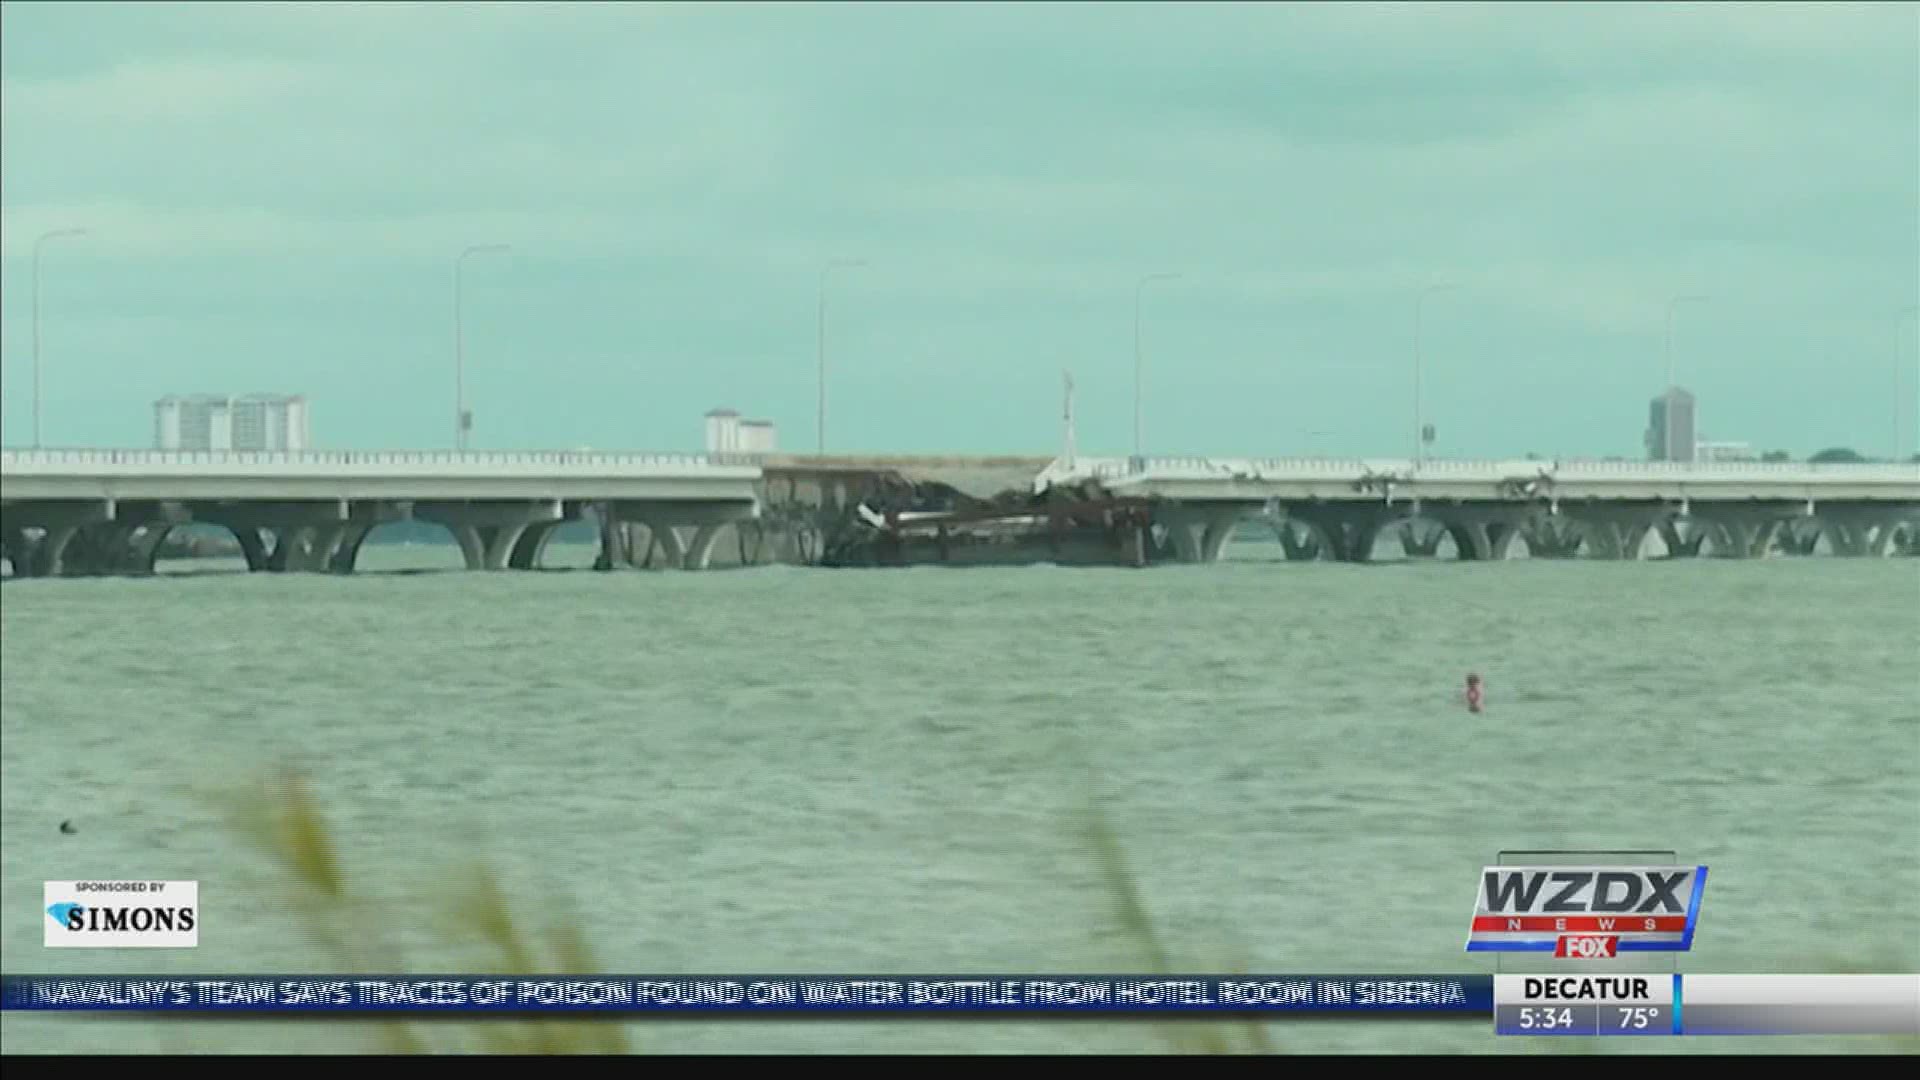 3 Mile Bridge was severely damaged and power is still out for hundreds of thousands after Hurricane Sally.